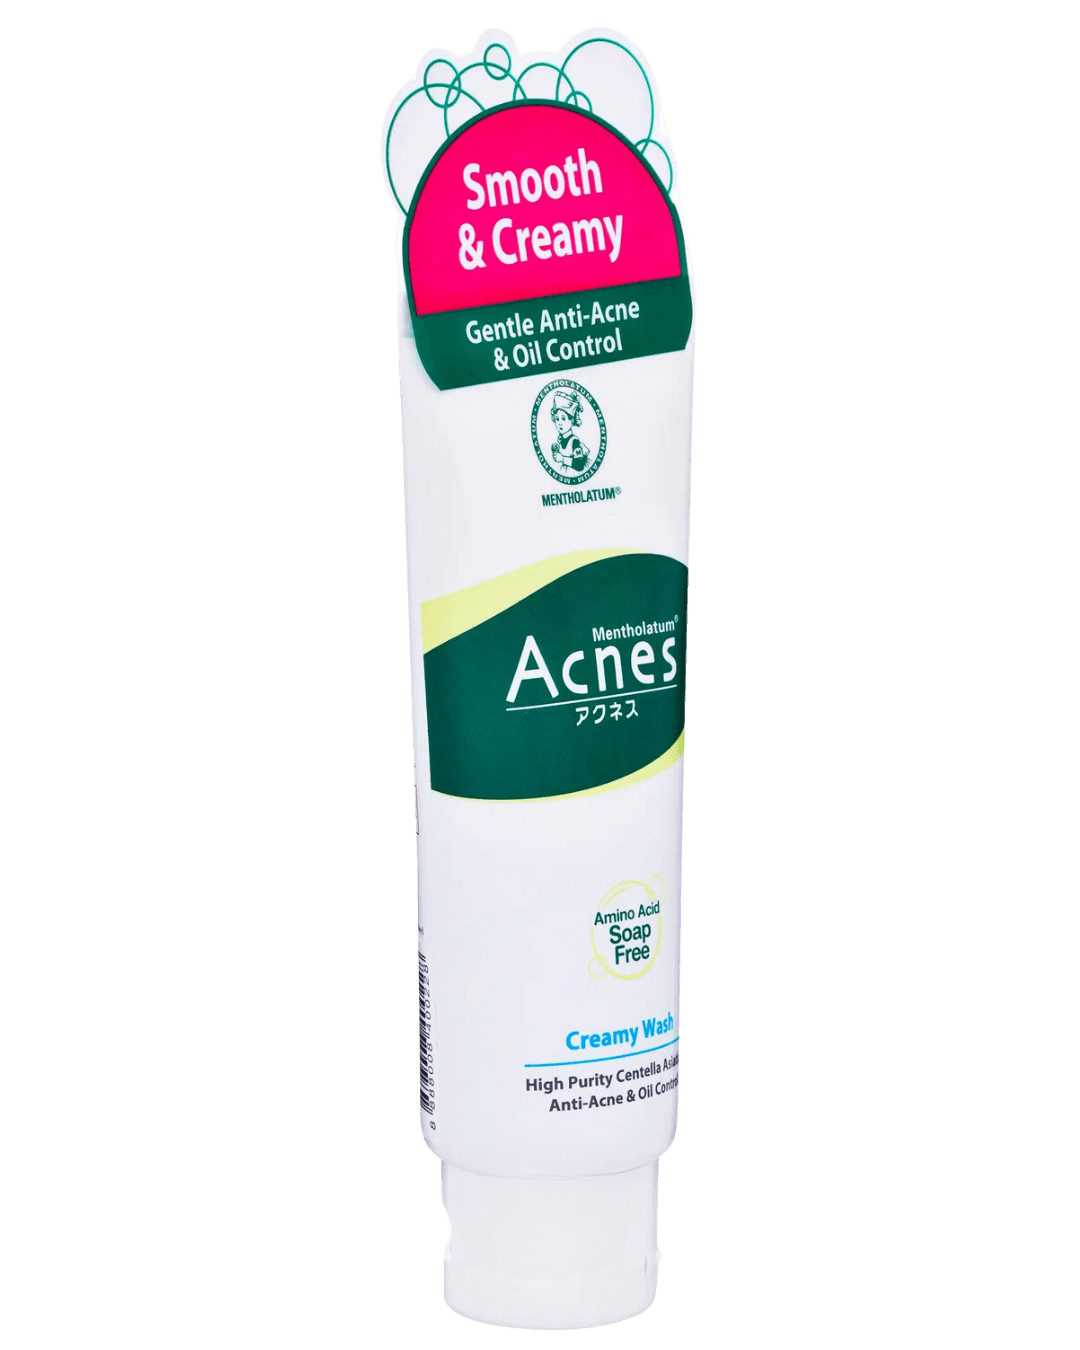 Daily Vanity Beauty Awards 2024 Best  Acnes 6-in-1 Wash Voted By Beauty Experts